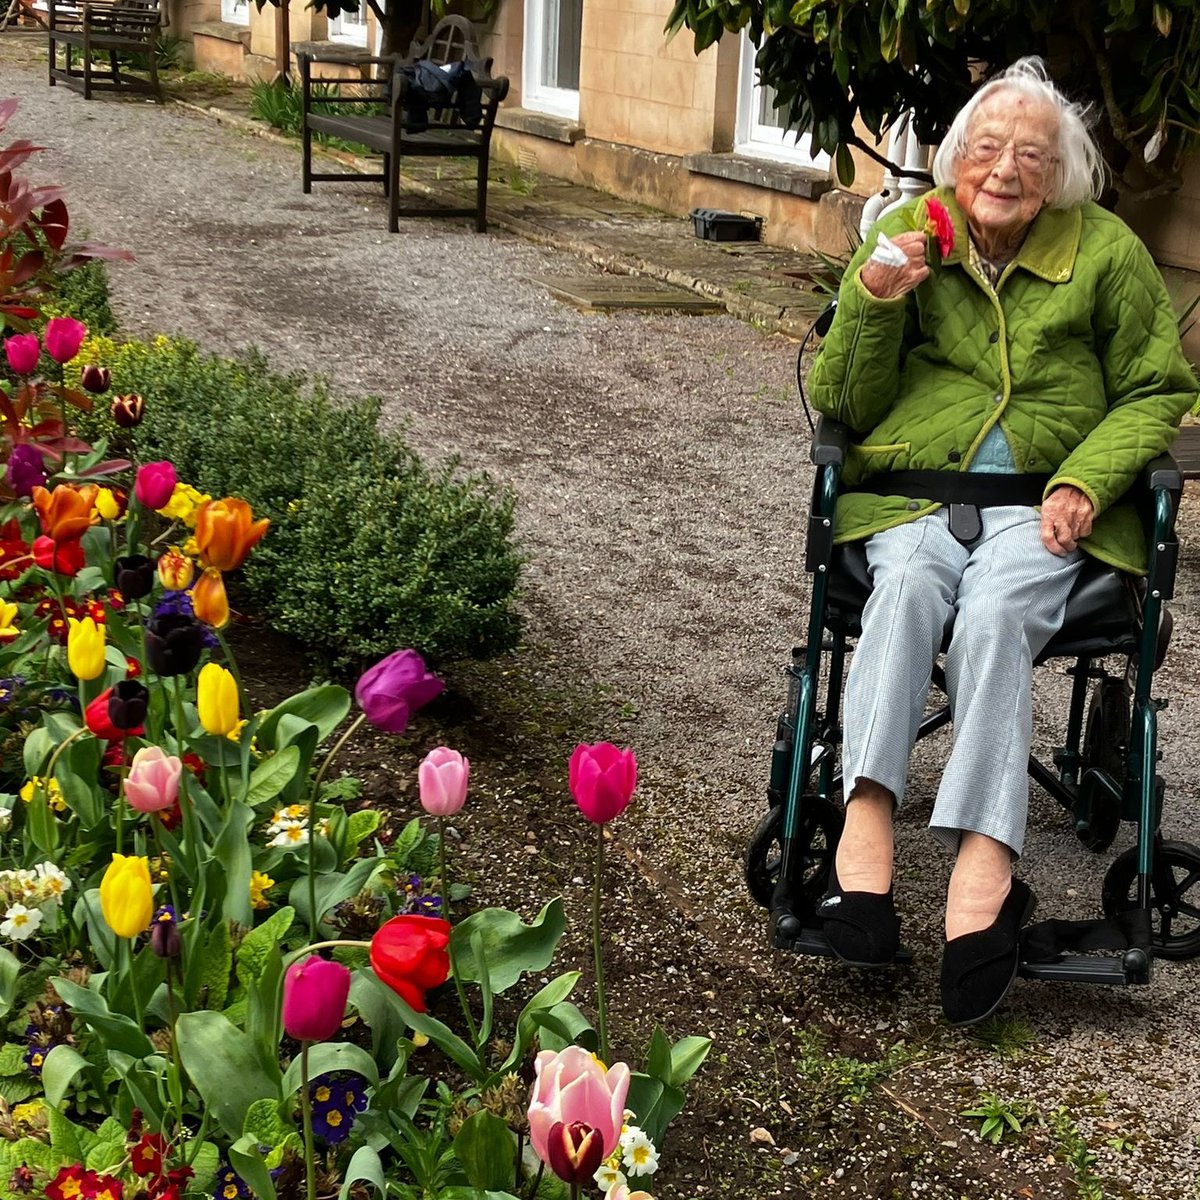 Now that the weather is finally improving, it's lovely to be out in our grounds feeling the sun on your face! #carehome #wellington #somerset #bridgwater #devon #culmstock #hemyock #gardens